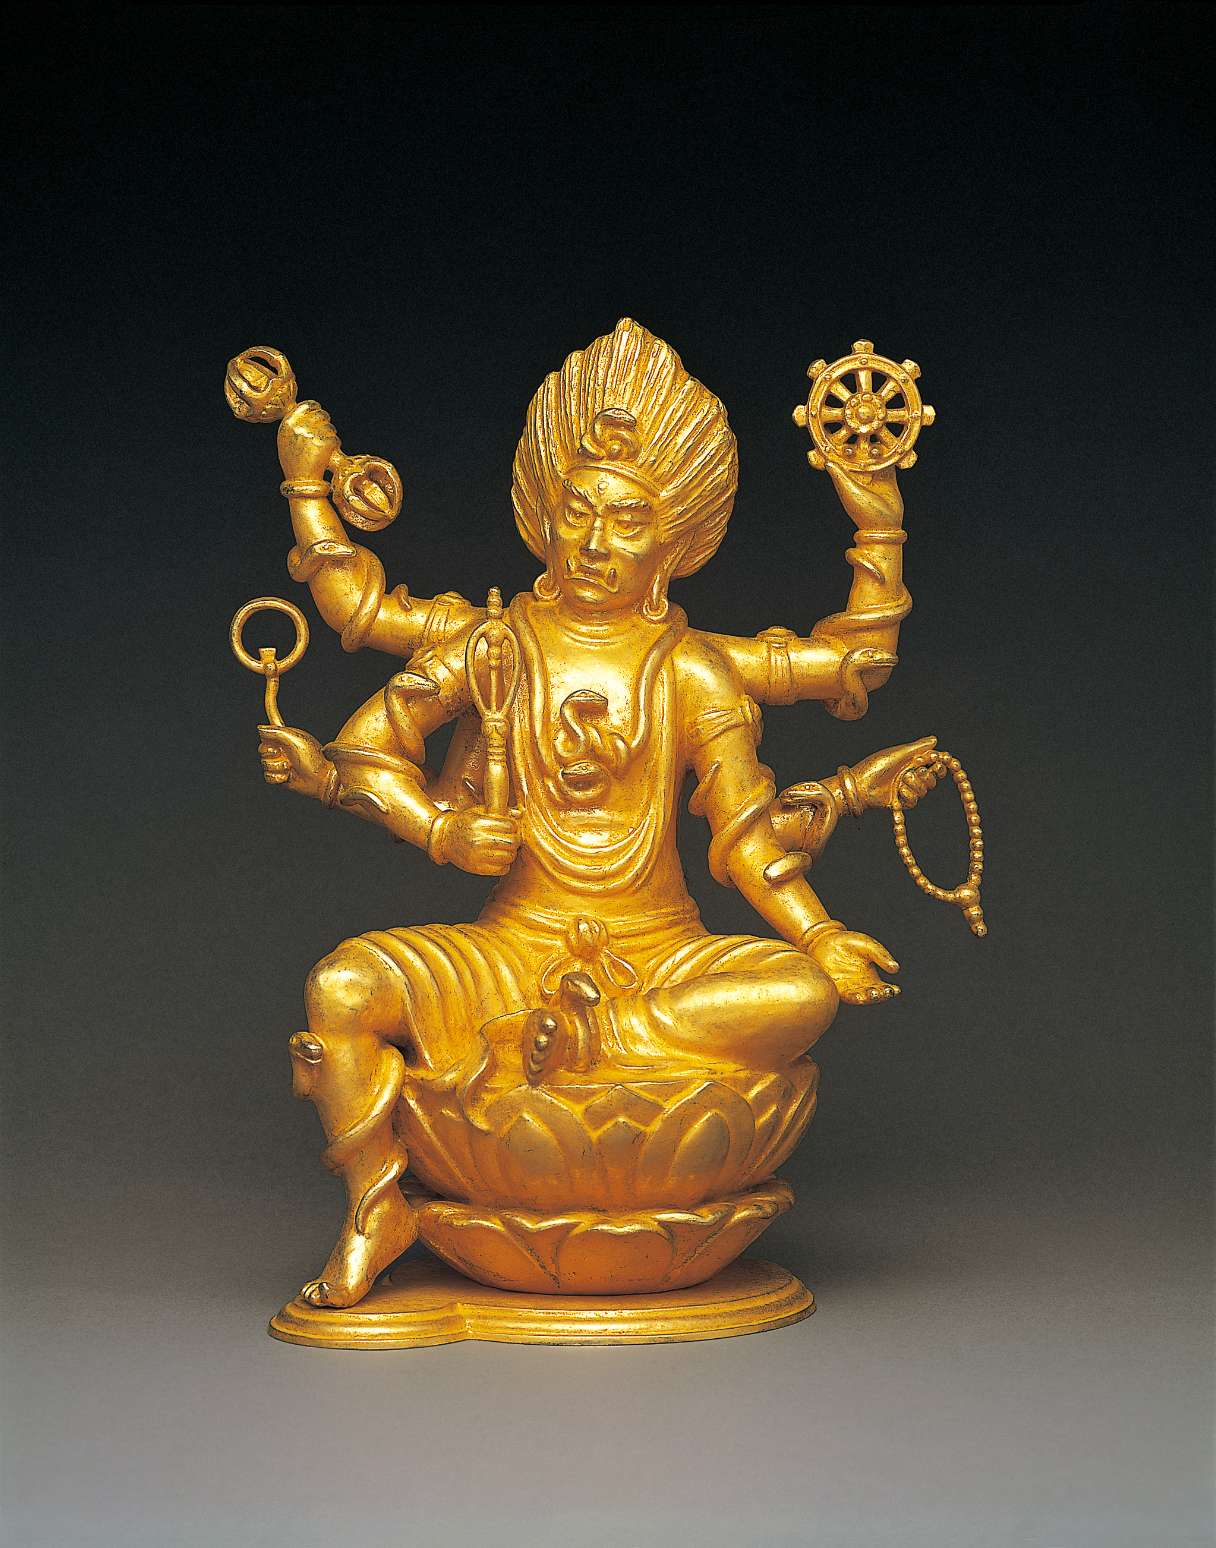 A scowling golden hued six-armed figure with fangs and wild windswept hair sits one leg akimbo atop a lotus seat; a snake coils on each limb and on his brow, and each hand wields a symbolic implement.